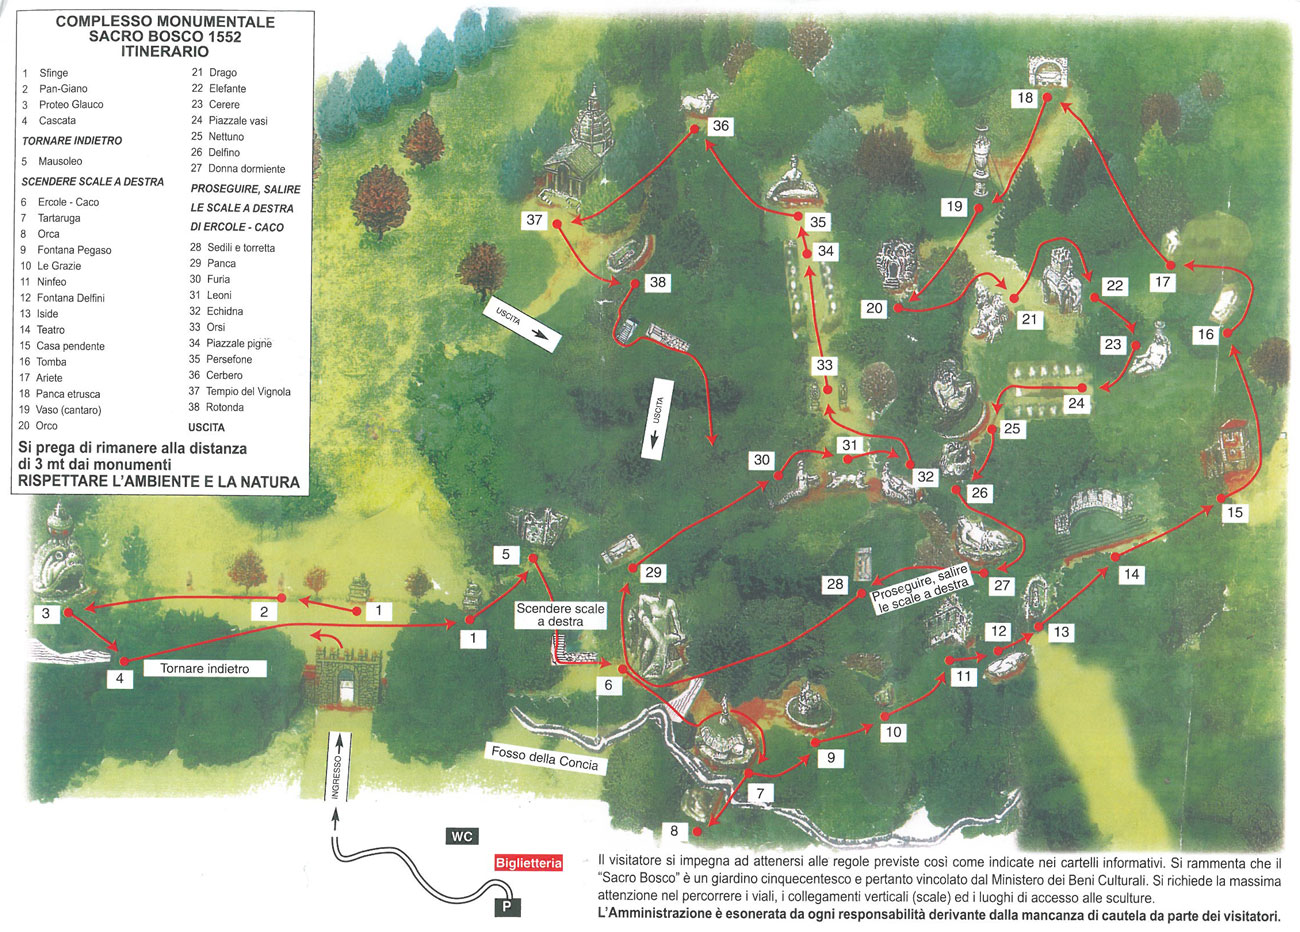 MAP of the Statues at Sacro Bosco....NOT drawn to scale.